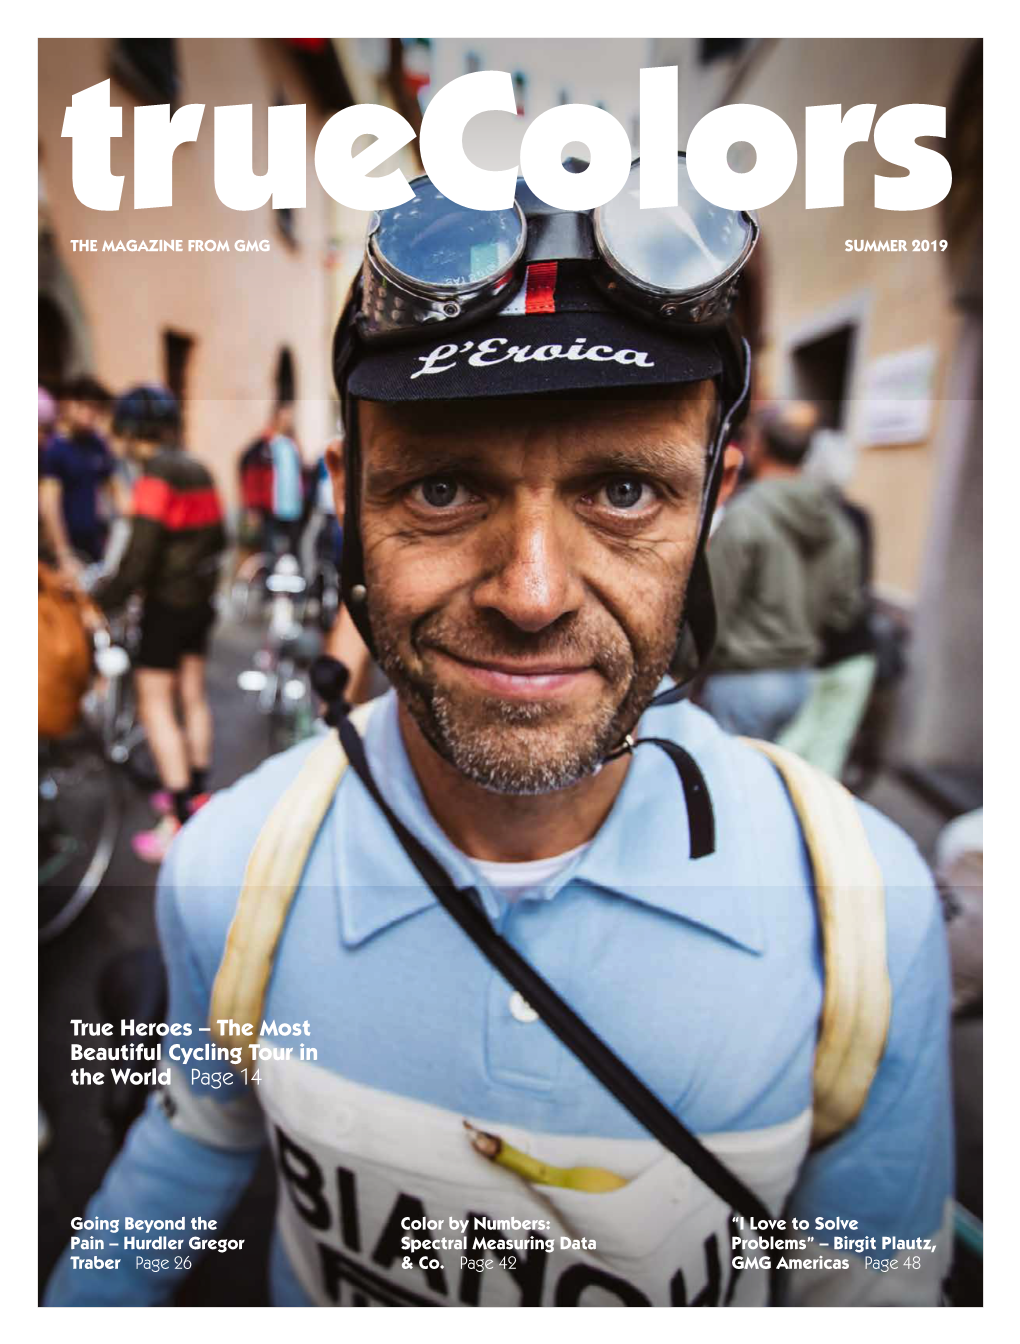 True Heroes – the Most Beautiful Cycling Tour in the World Page 14